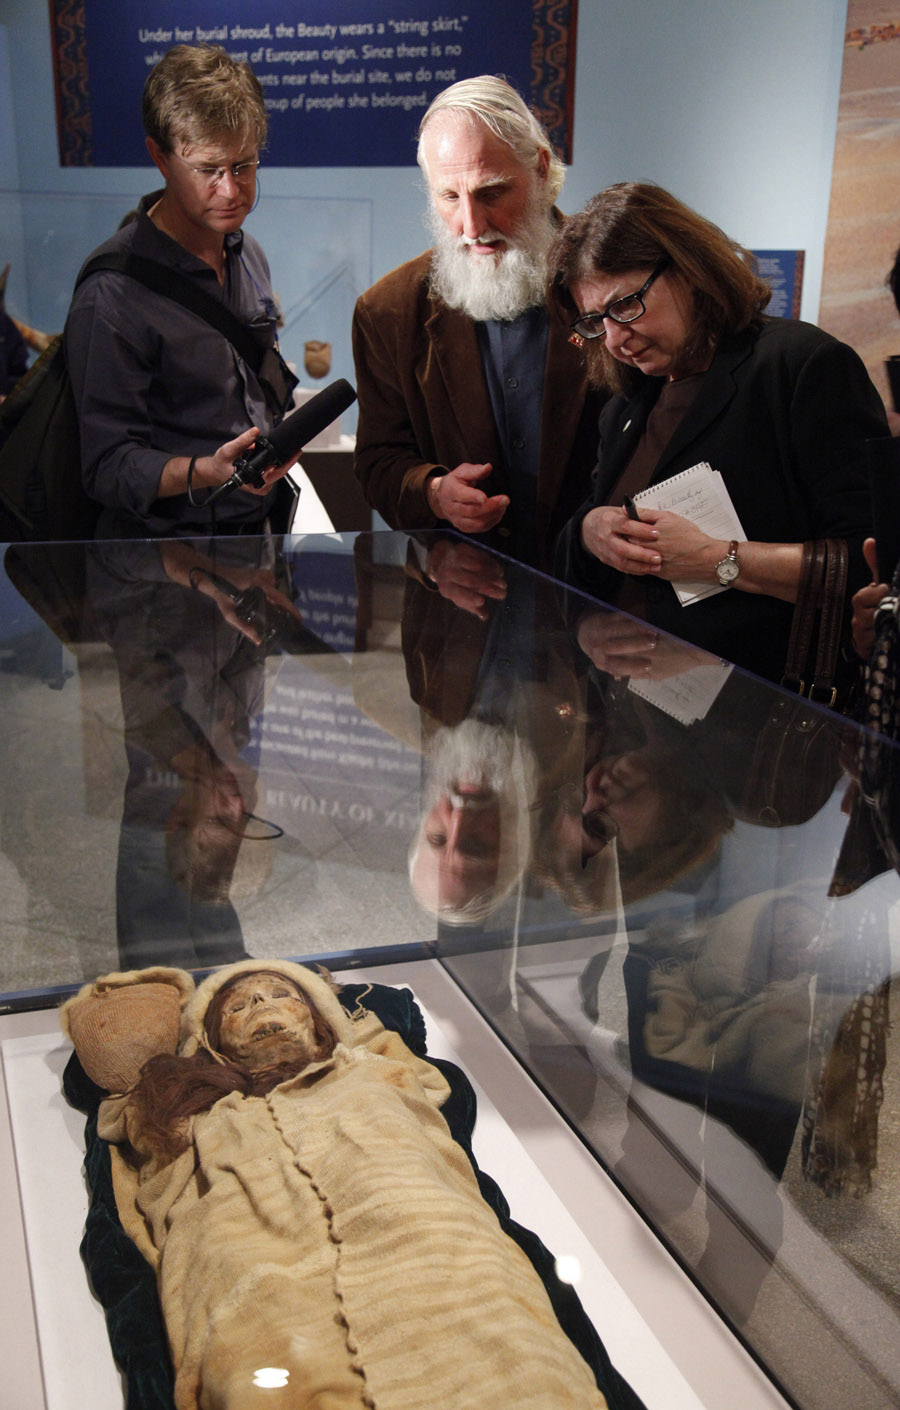 Prof. Victor H. Mair (C) of Pennsylvania University introduces to others a 3800-year-old mummy during an exhibition featuring archeological findings in northwest China&apos;s Xinjiang Uygur Autonomous Region at the museum of Pennsylvania University in Philadelphia, Feb. 18, 2011. It is the third leg of the exhibition in the U.S., which will last until March 28, 2011. [Xinhua]